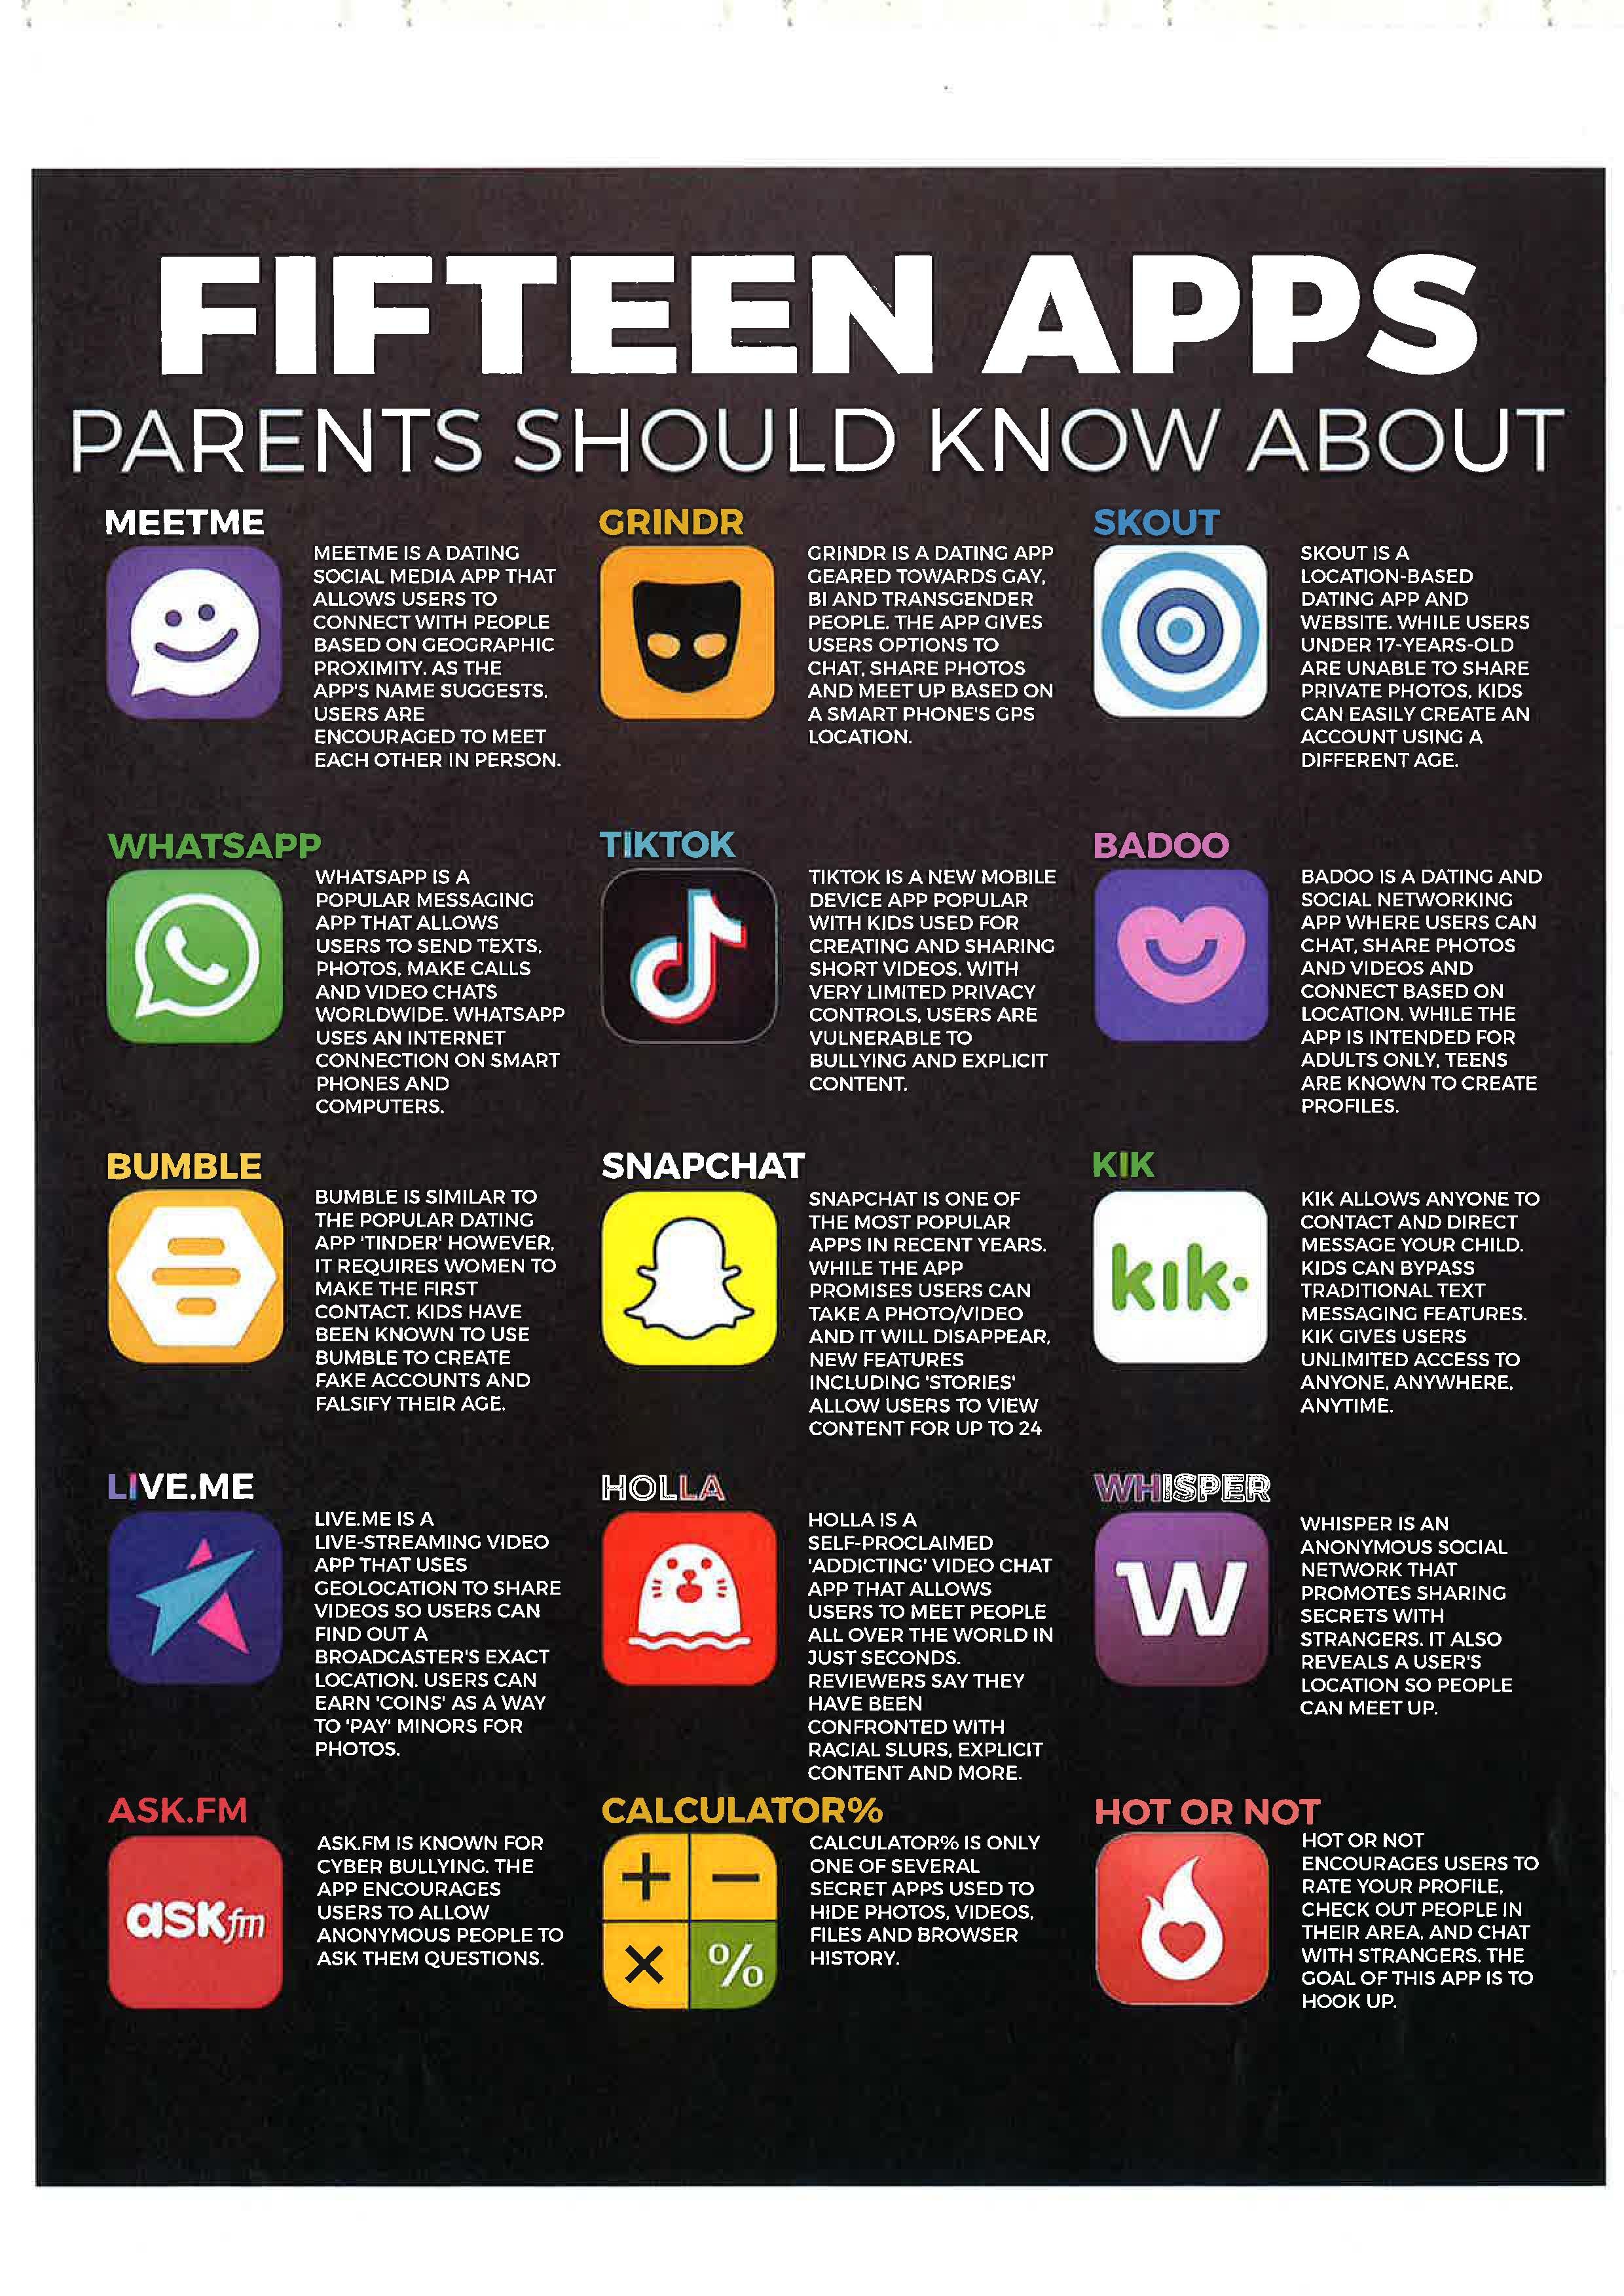 Fifteen Apps Parents Should Know About